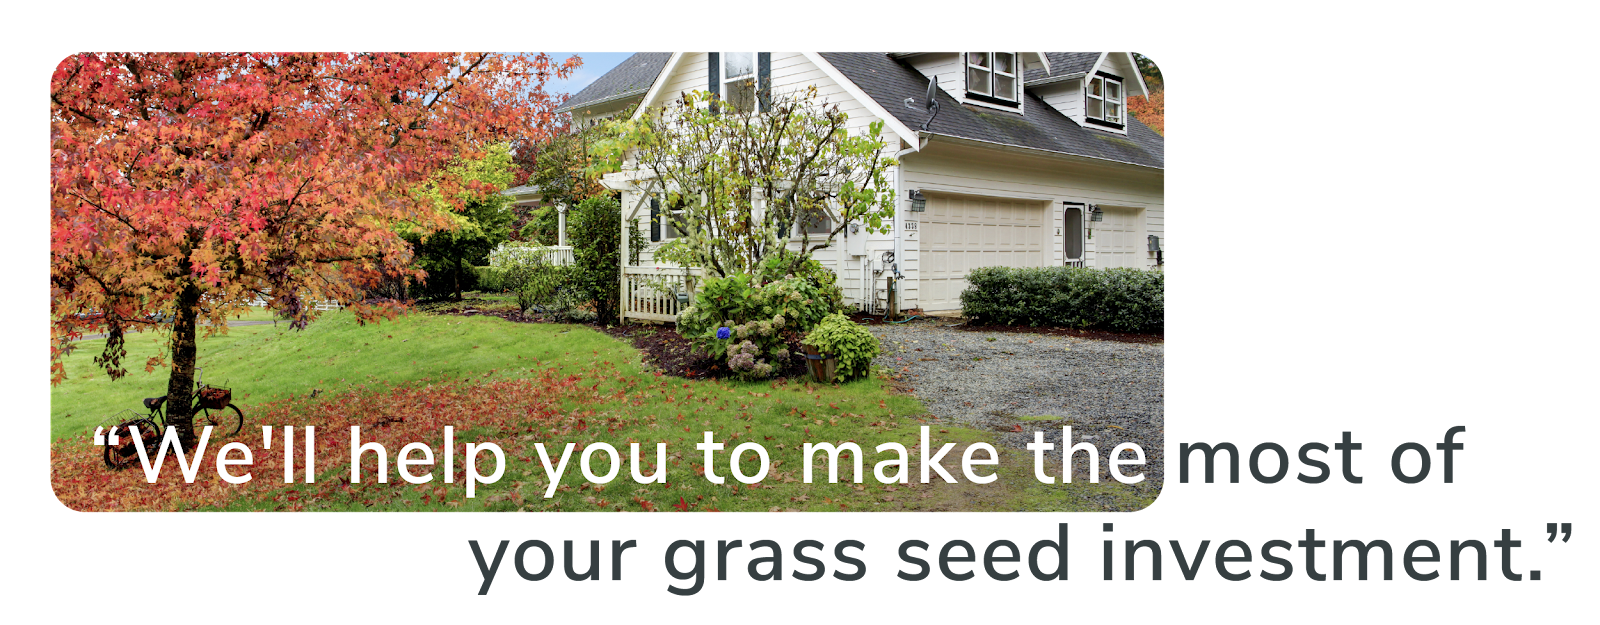 fall leaves fallen on a green lawn with the words we'll help you to make the most of your grass seed investment